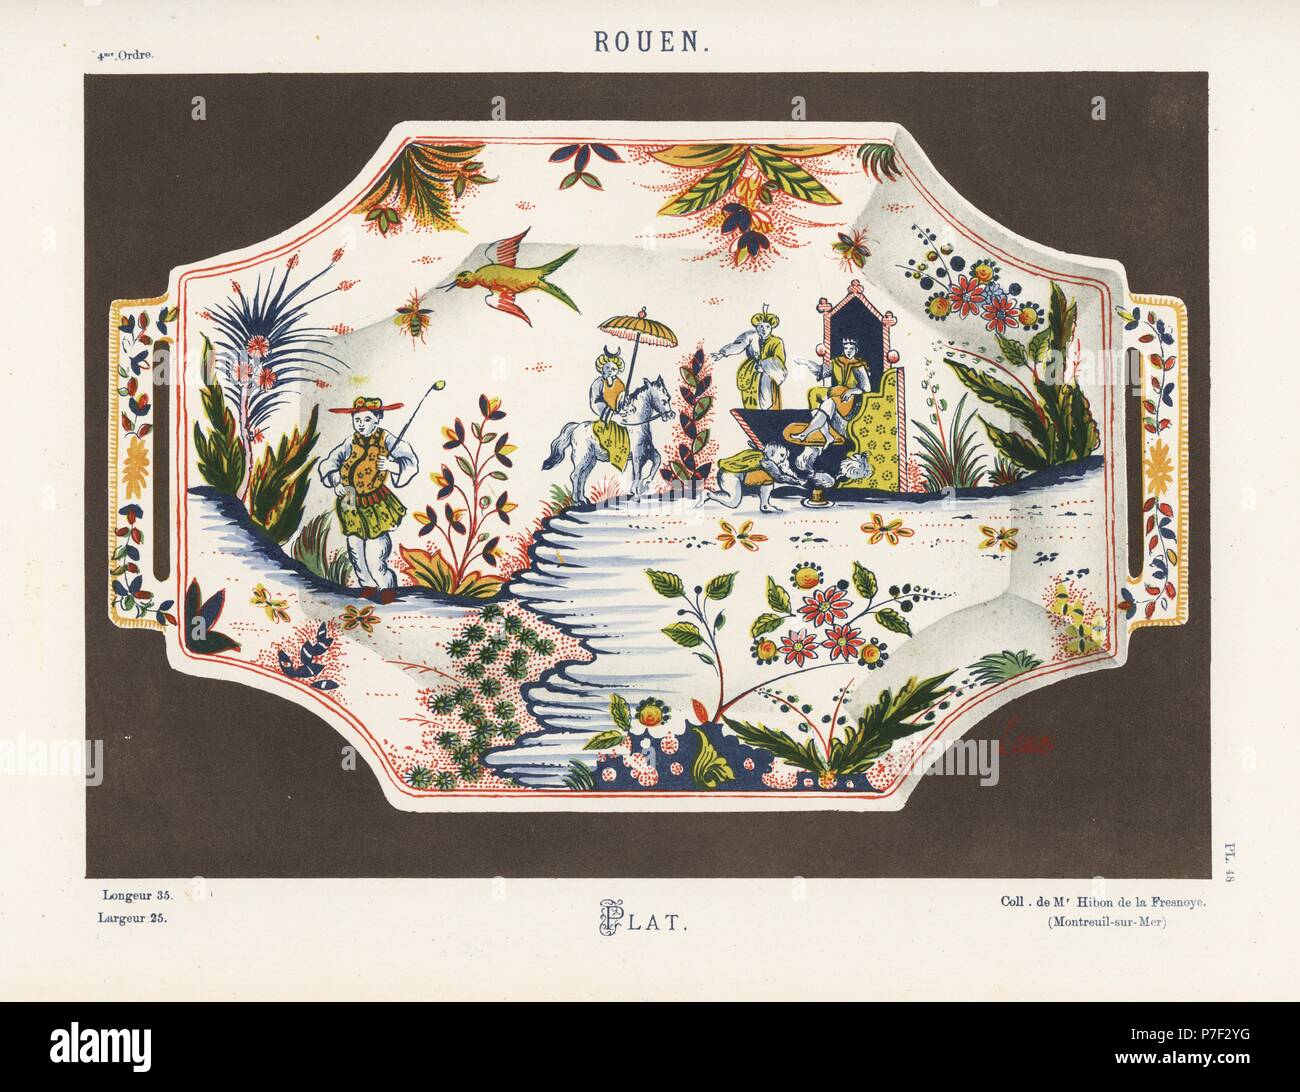 Platter with handles from Rouen, France. Decorated with a fantastical Oriental scene with king, throne, parasol, birds, flowers. Hand-finished chromolithograph from Ris Paquot's General History of Ancient French and Foreign Glazed Pottery, Chez l'Auteur, Paris, 1874. Stock Photo